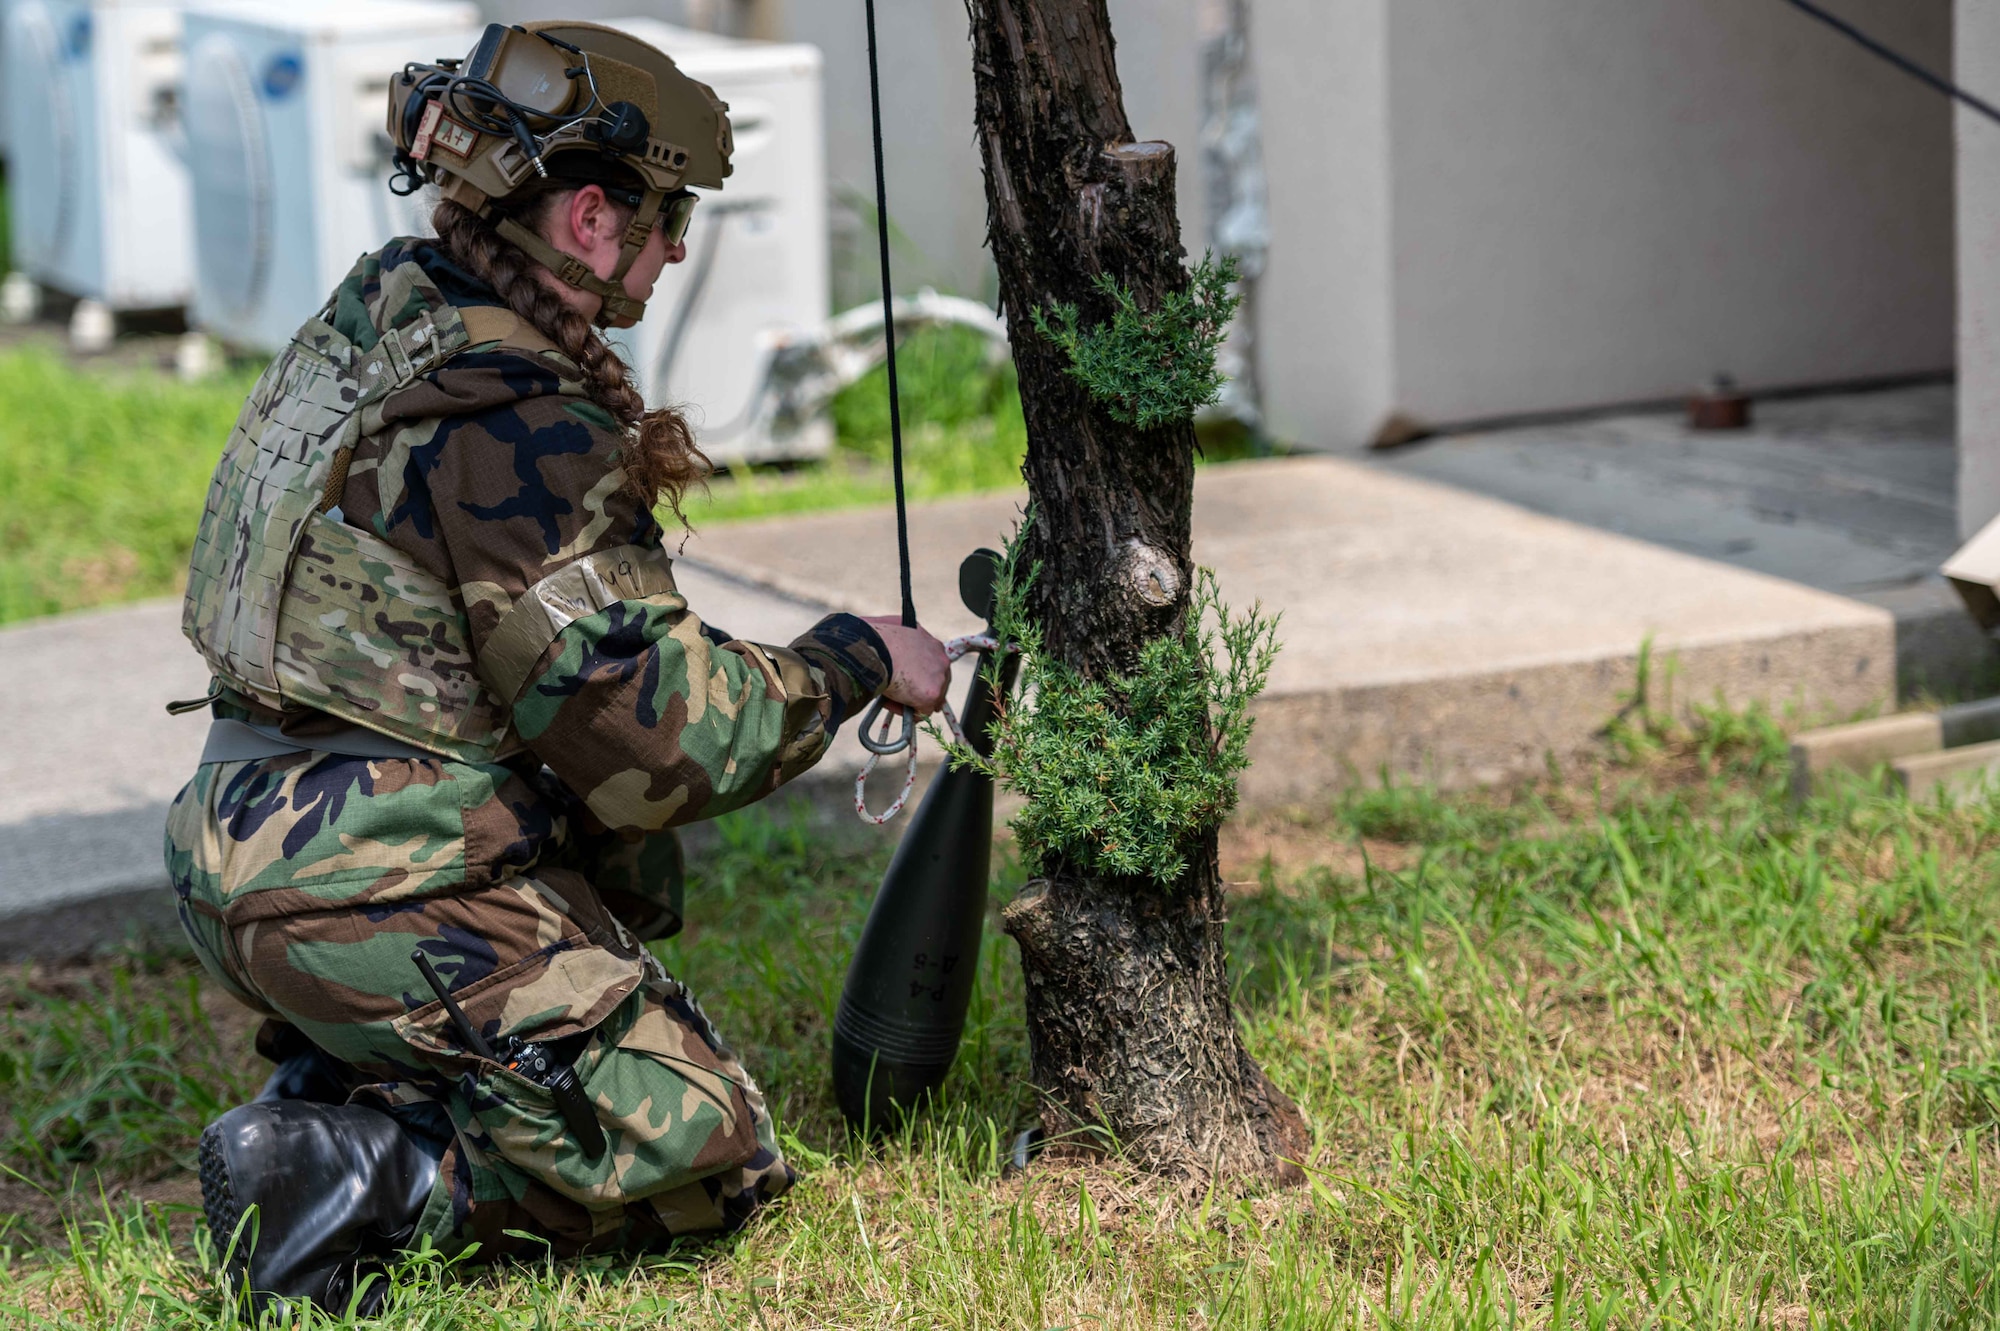 Senior Airman Janie Roberts, 51st Civil Engineer Squadron explosive ordnance disposal (EOD) team lead, attaches a rope and pulley to a simulated unexploded ordnance (UXO) during a base-wide training event at Osan Air Base